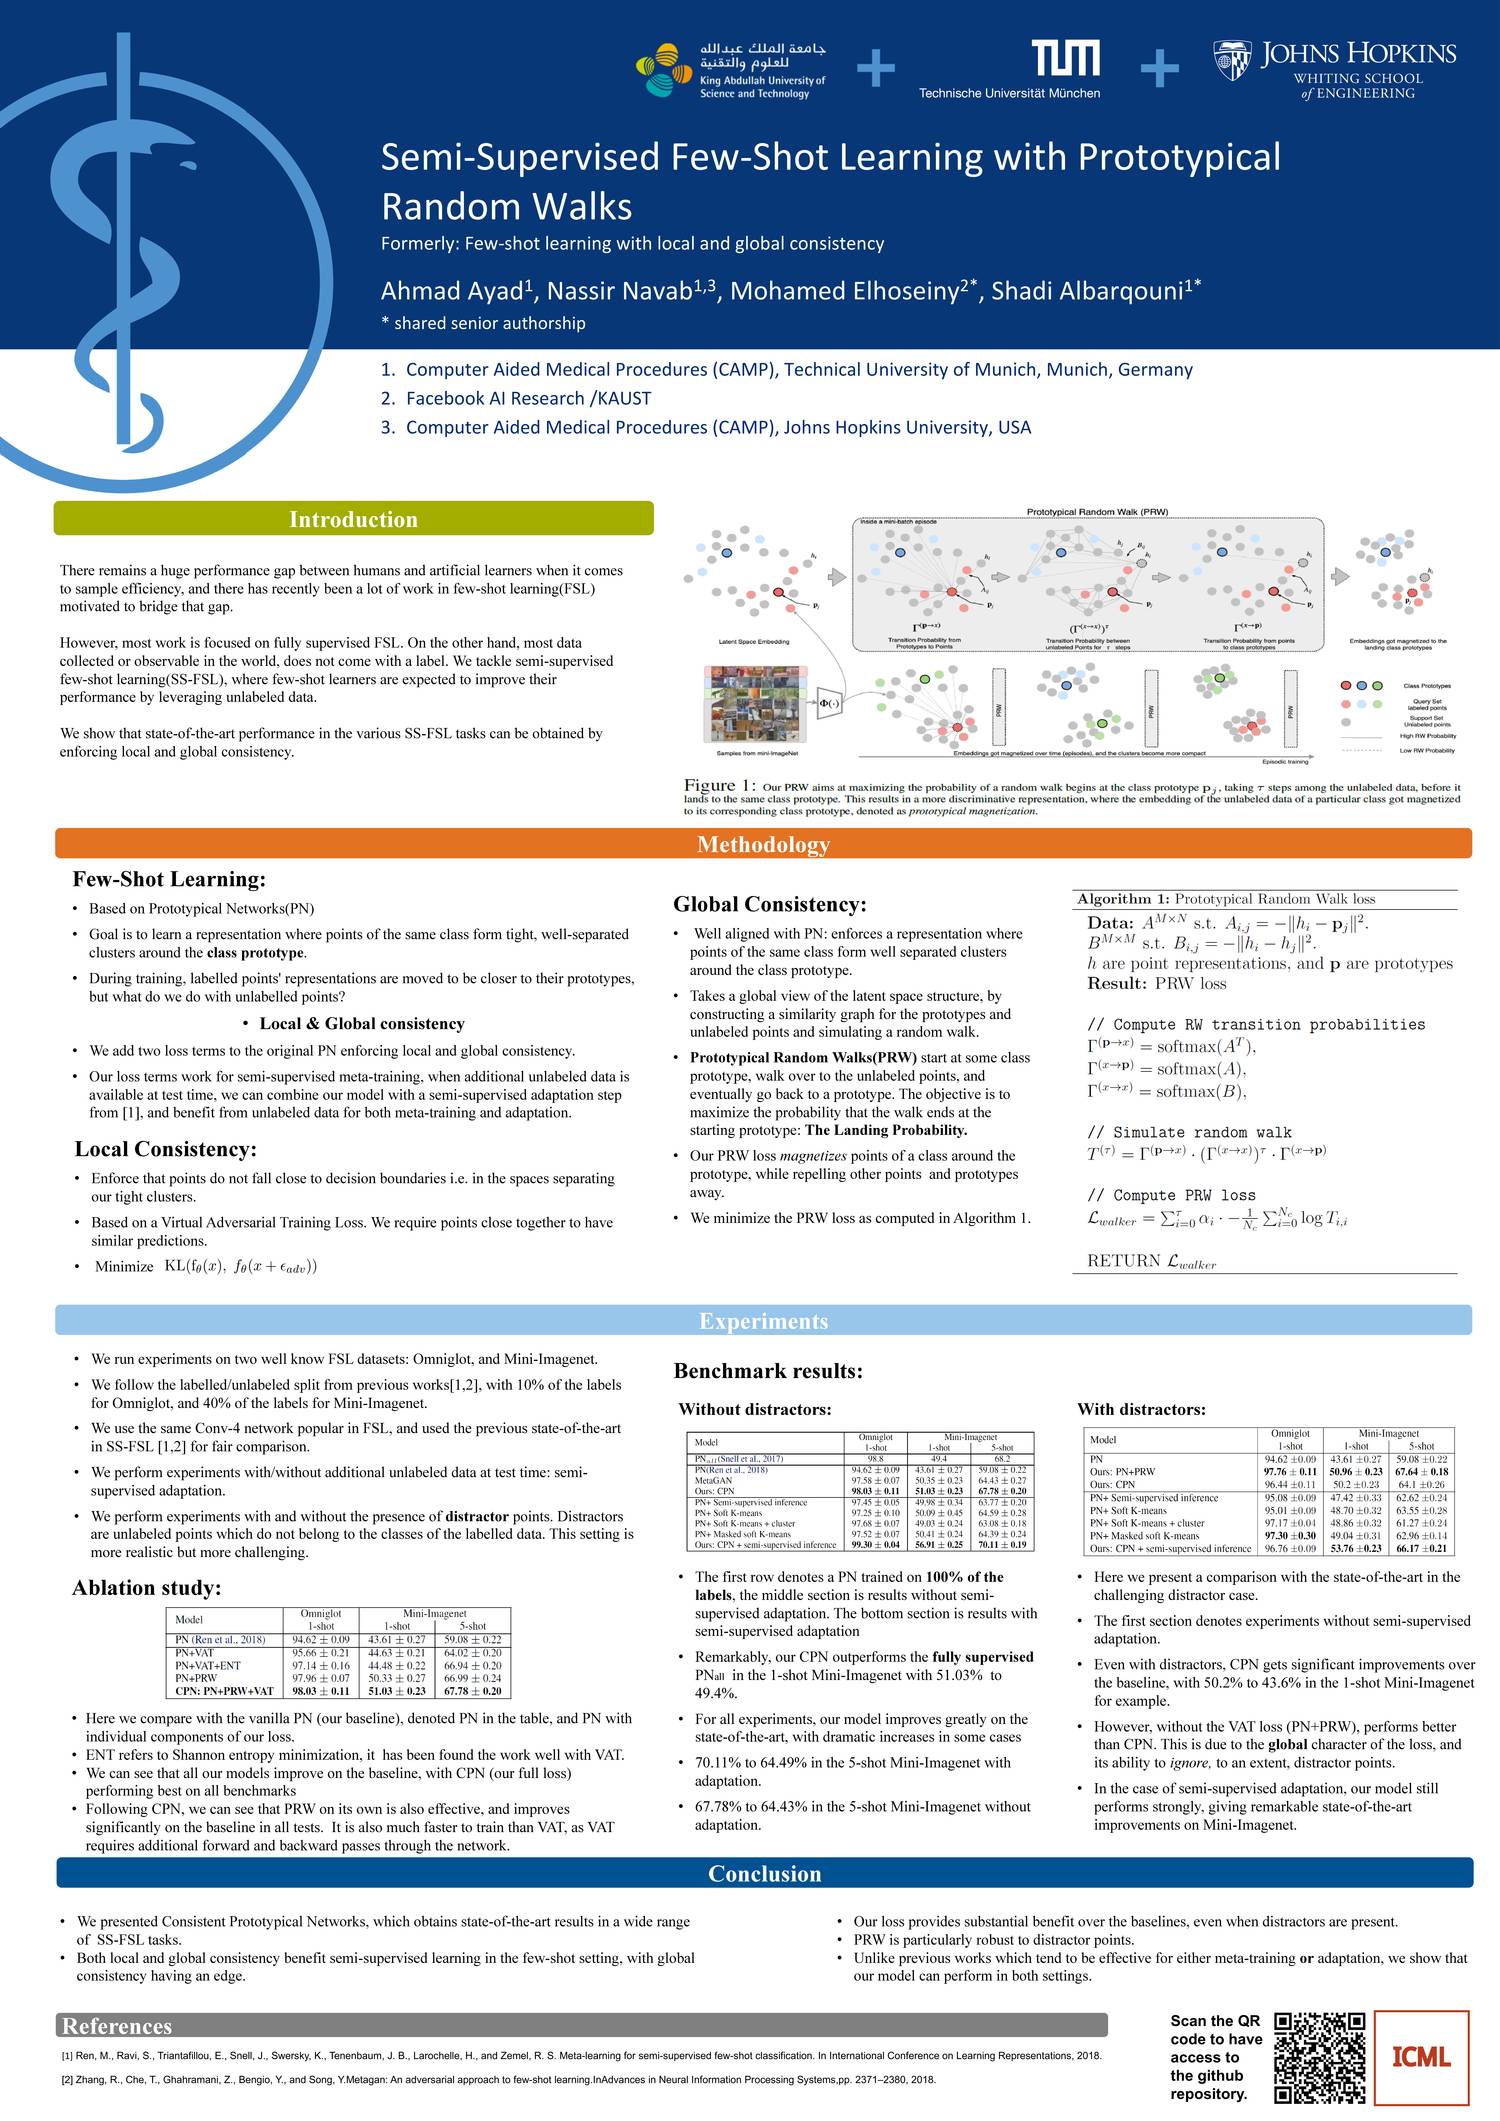 ICML_Poster_tmp.pdf DocDroid